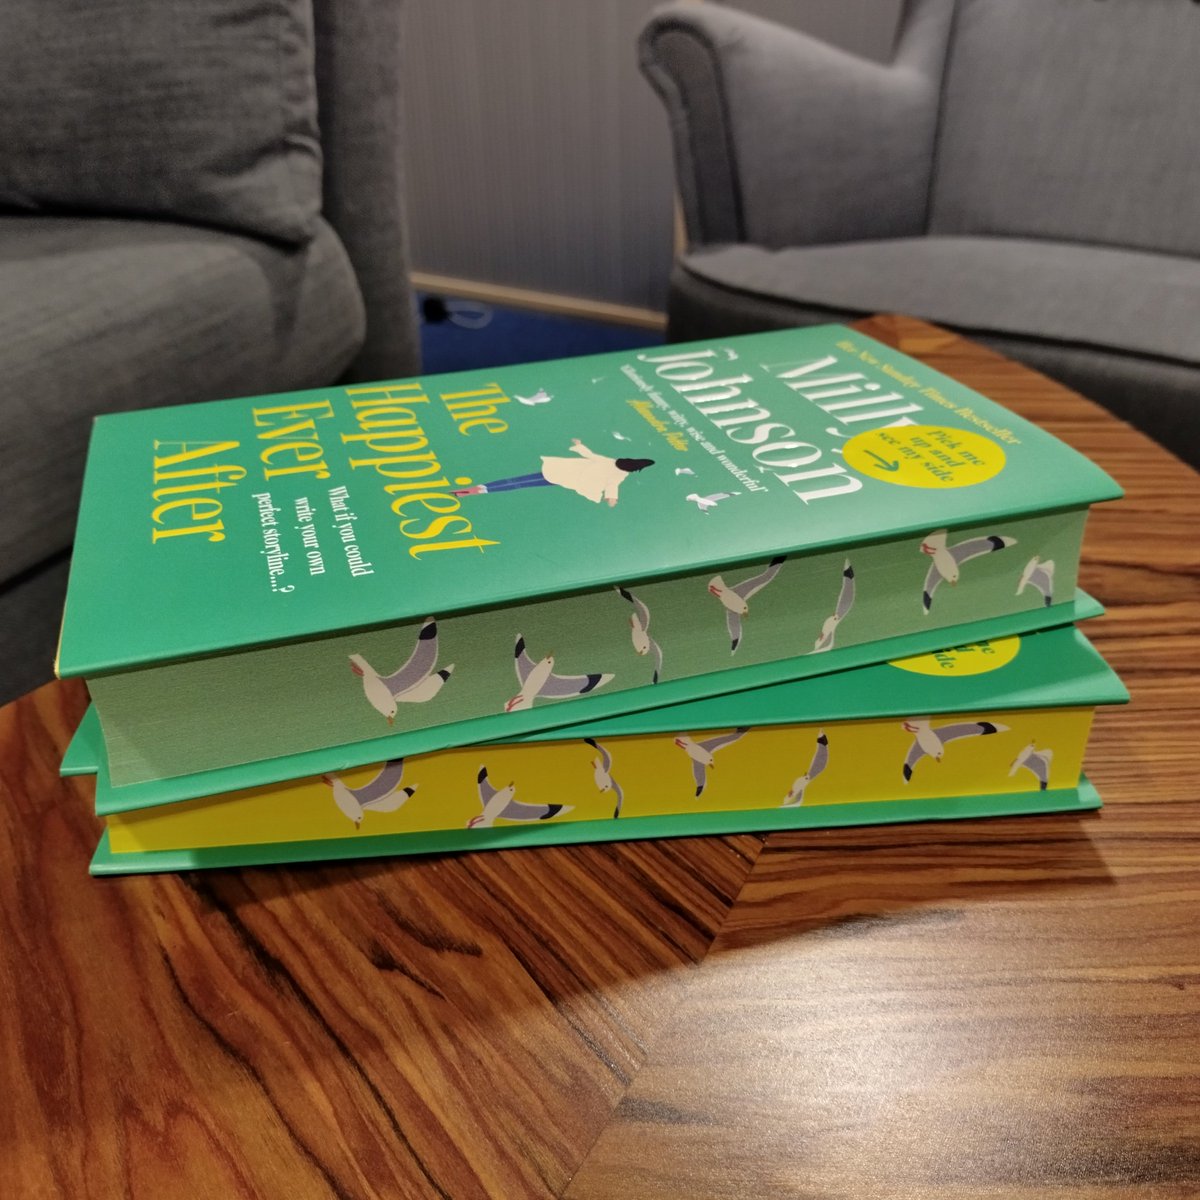 Please join me in wishing @millyjohnson a HUGE happy publication day for #TheHappiestEverAfter, out TODAY in all good #ChooseBookshops (SIGNED editions) and supermarkets! Especially excited to reveal these stunning #spredges editions, available exclusively in @sainsburys!